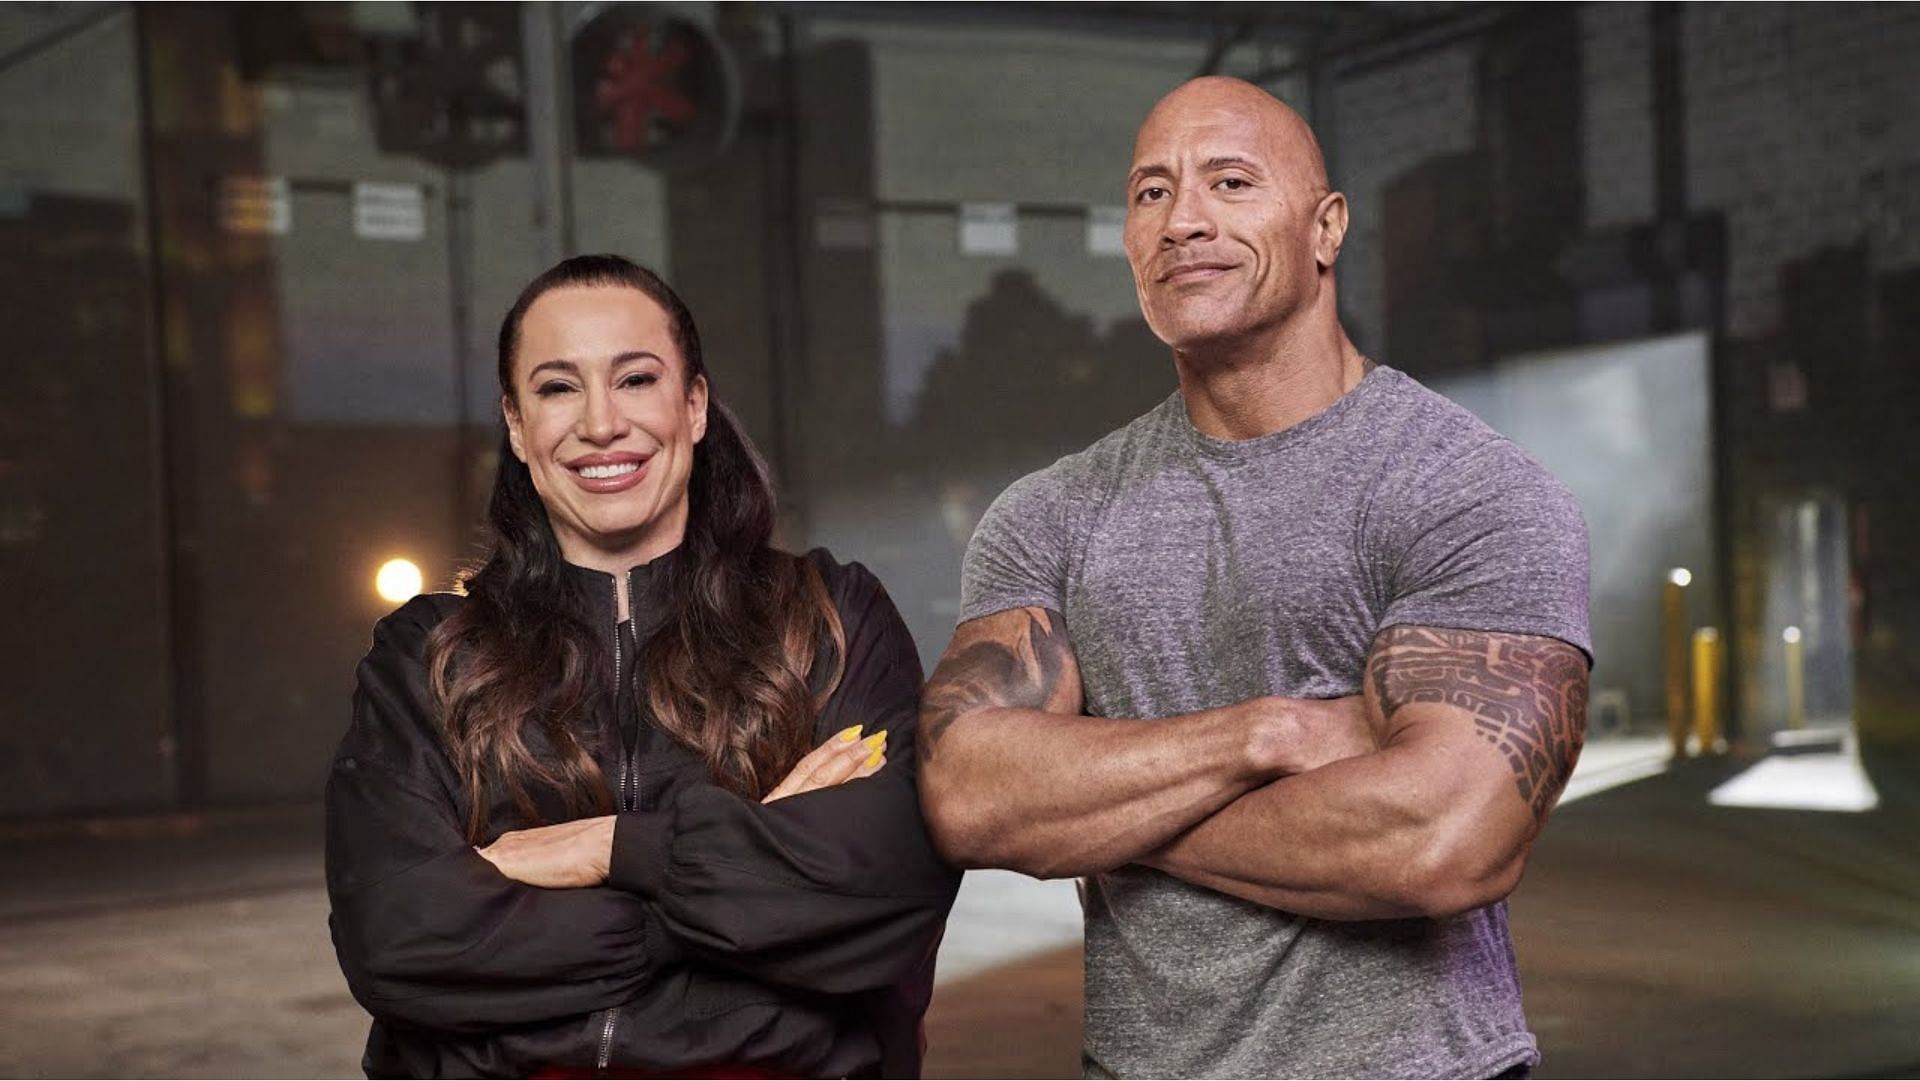 Dwayne Johnson and Dany Garcia divorced in 2008